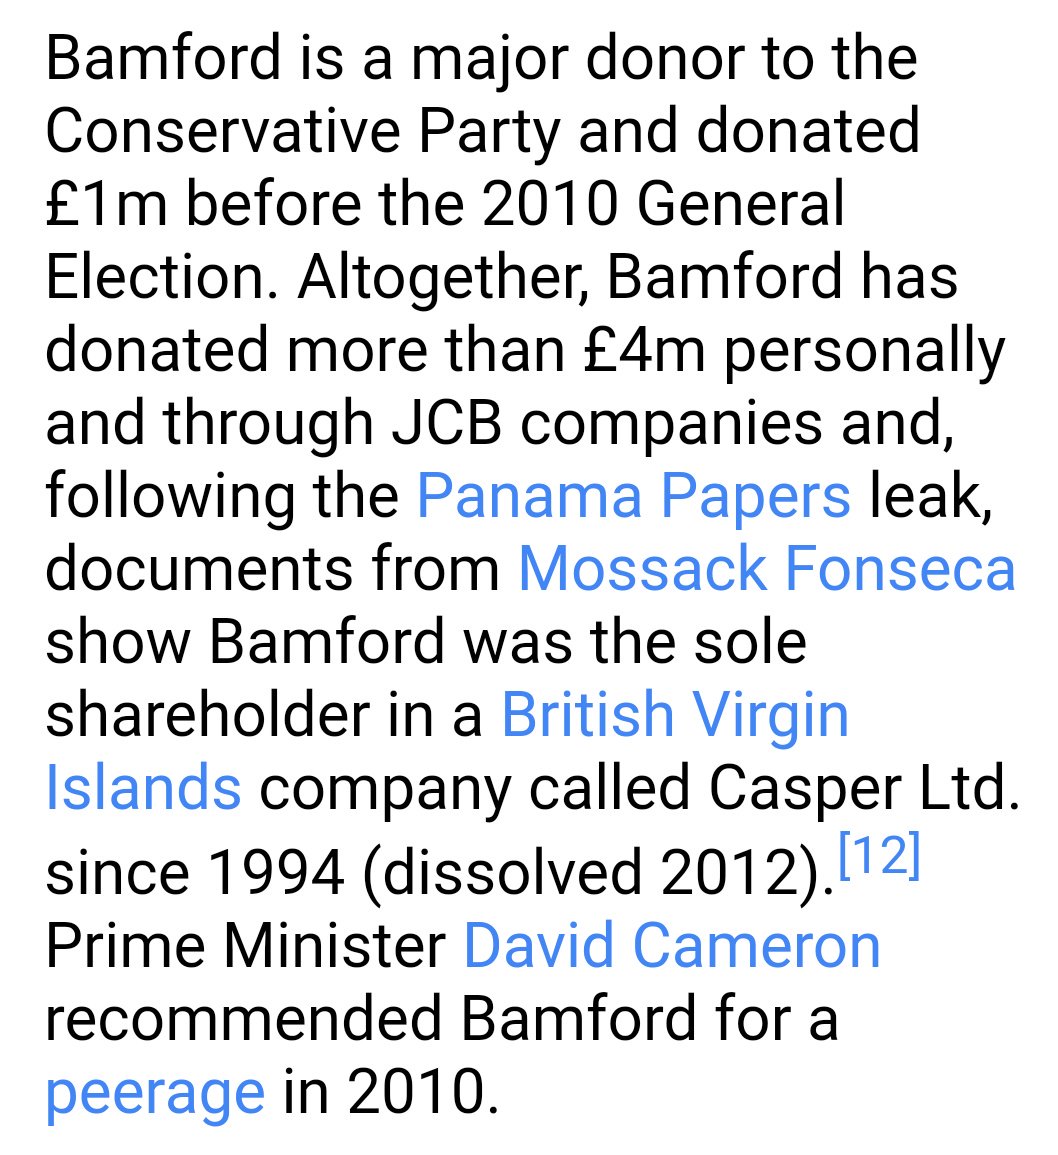 Sir Anthony Bamford, Tory donor, friend of Blair, BigEars and Hague, and JCB boss, also loaned money to Jeffrey Archer, one of Harvey Proctor's shirt shop donors. He is one of several on the list with links to children's charities. https://www.dailymail.co.uk/news/article-1286015/Why-950m-digger-king-Tory-donors-peerage-bulldozed.html#ixzz4Q5qIBQfr